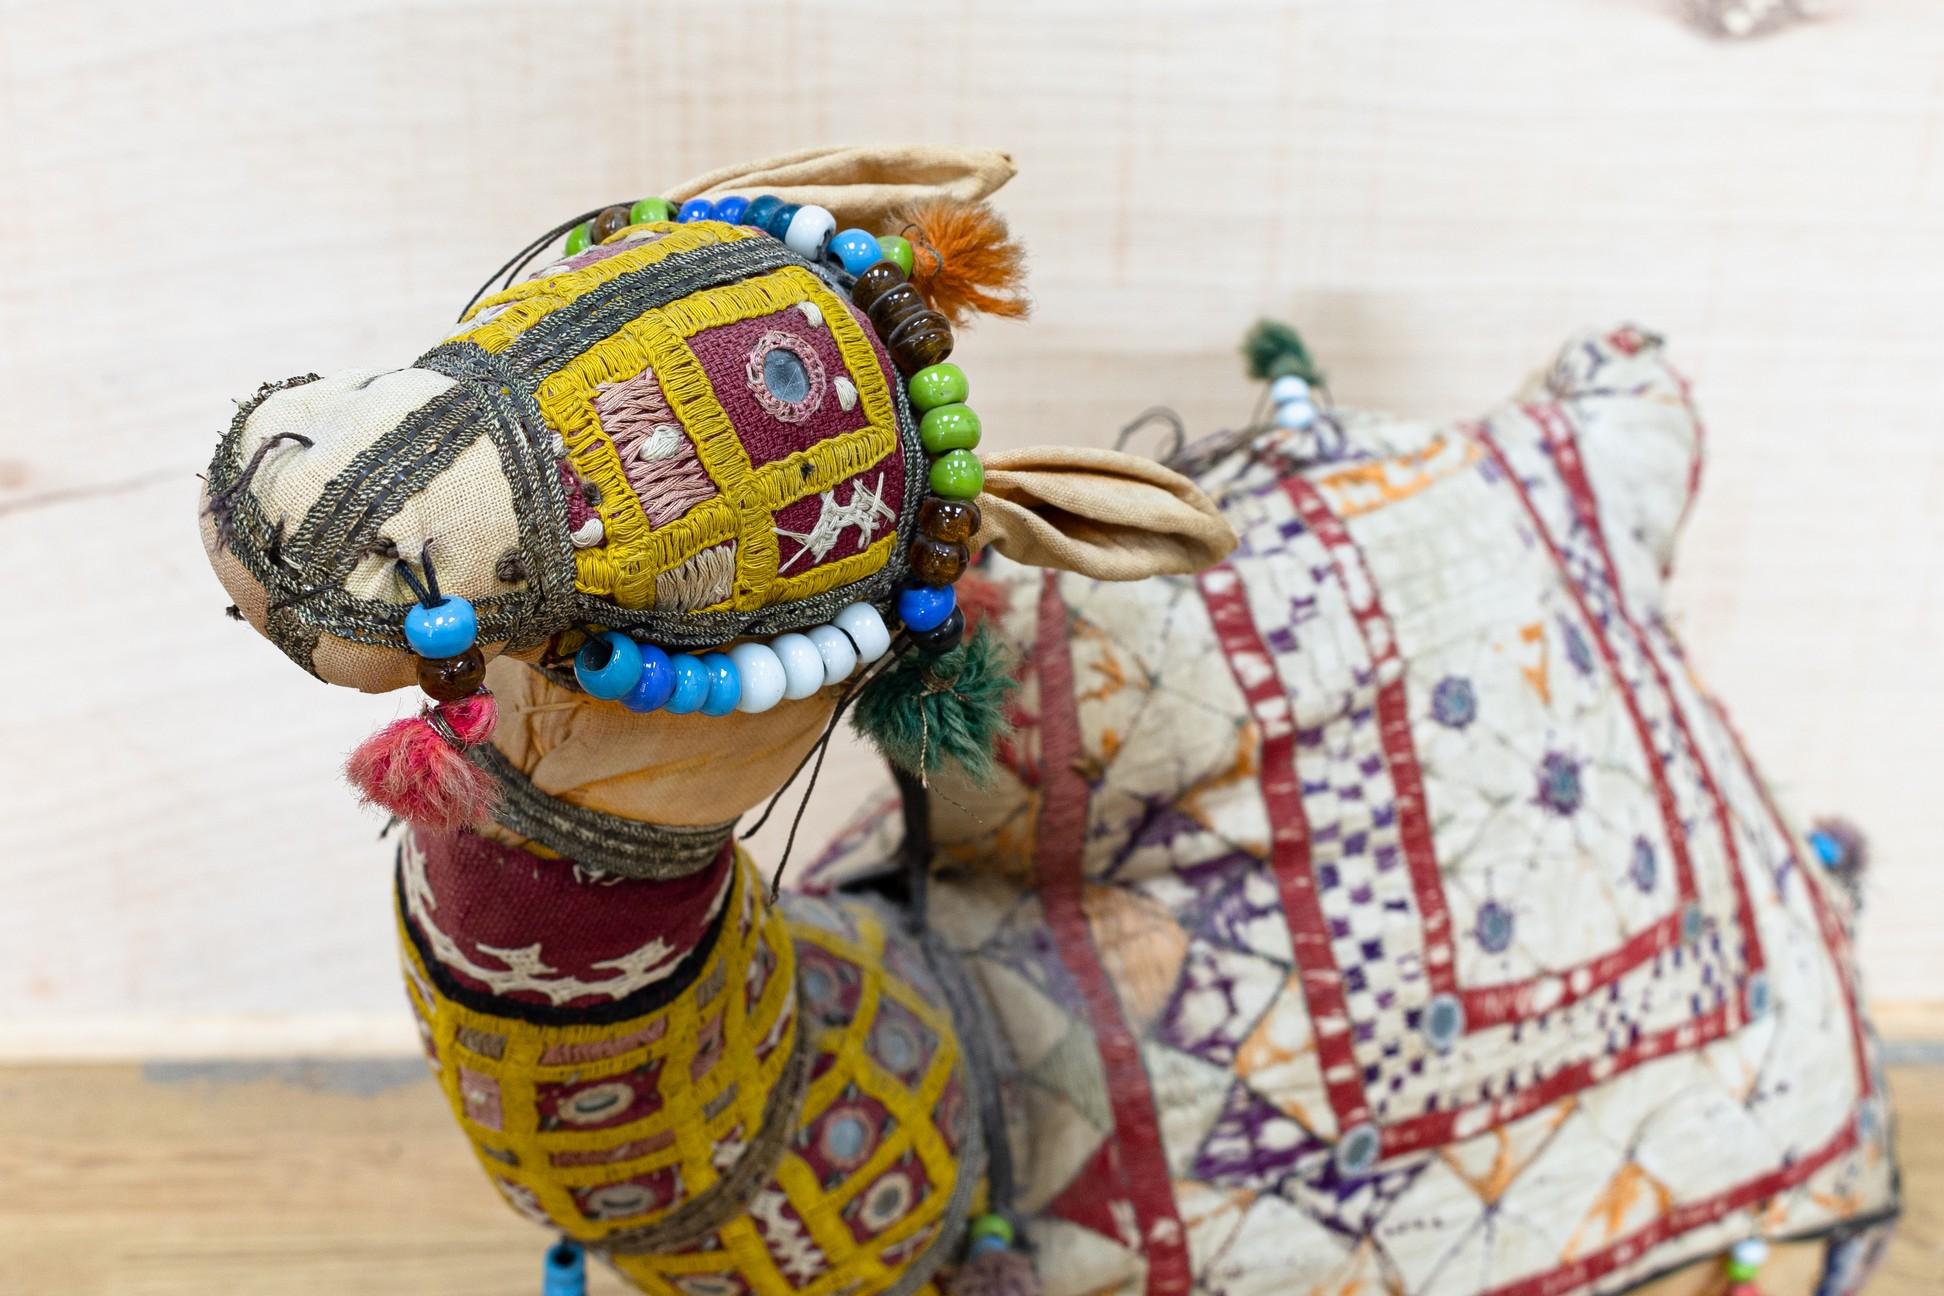 An exotic and eccentric vintage Raj embroidered camel toy. Circa 1950s. Handmade in Rajasthan, India, colorful fabric camel toy.Vintage oversized camel stuffed cotton embroidered and decorated with small mirrors. Anglo Raj, large stuffed camel